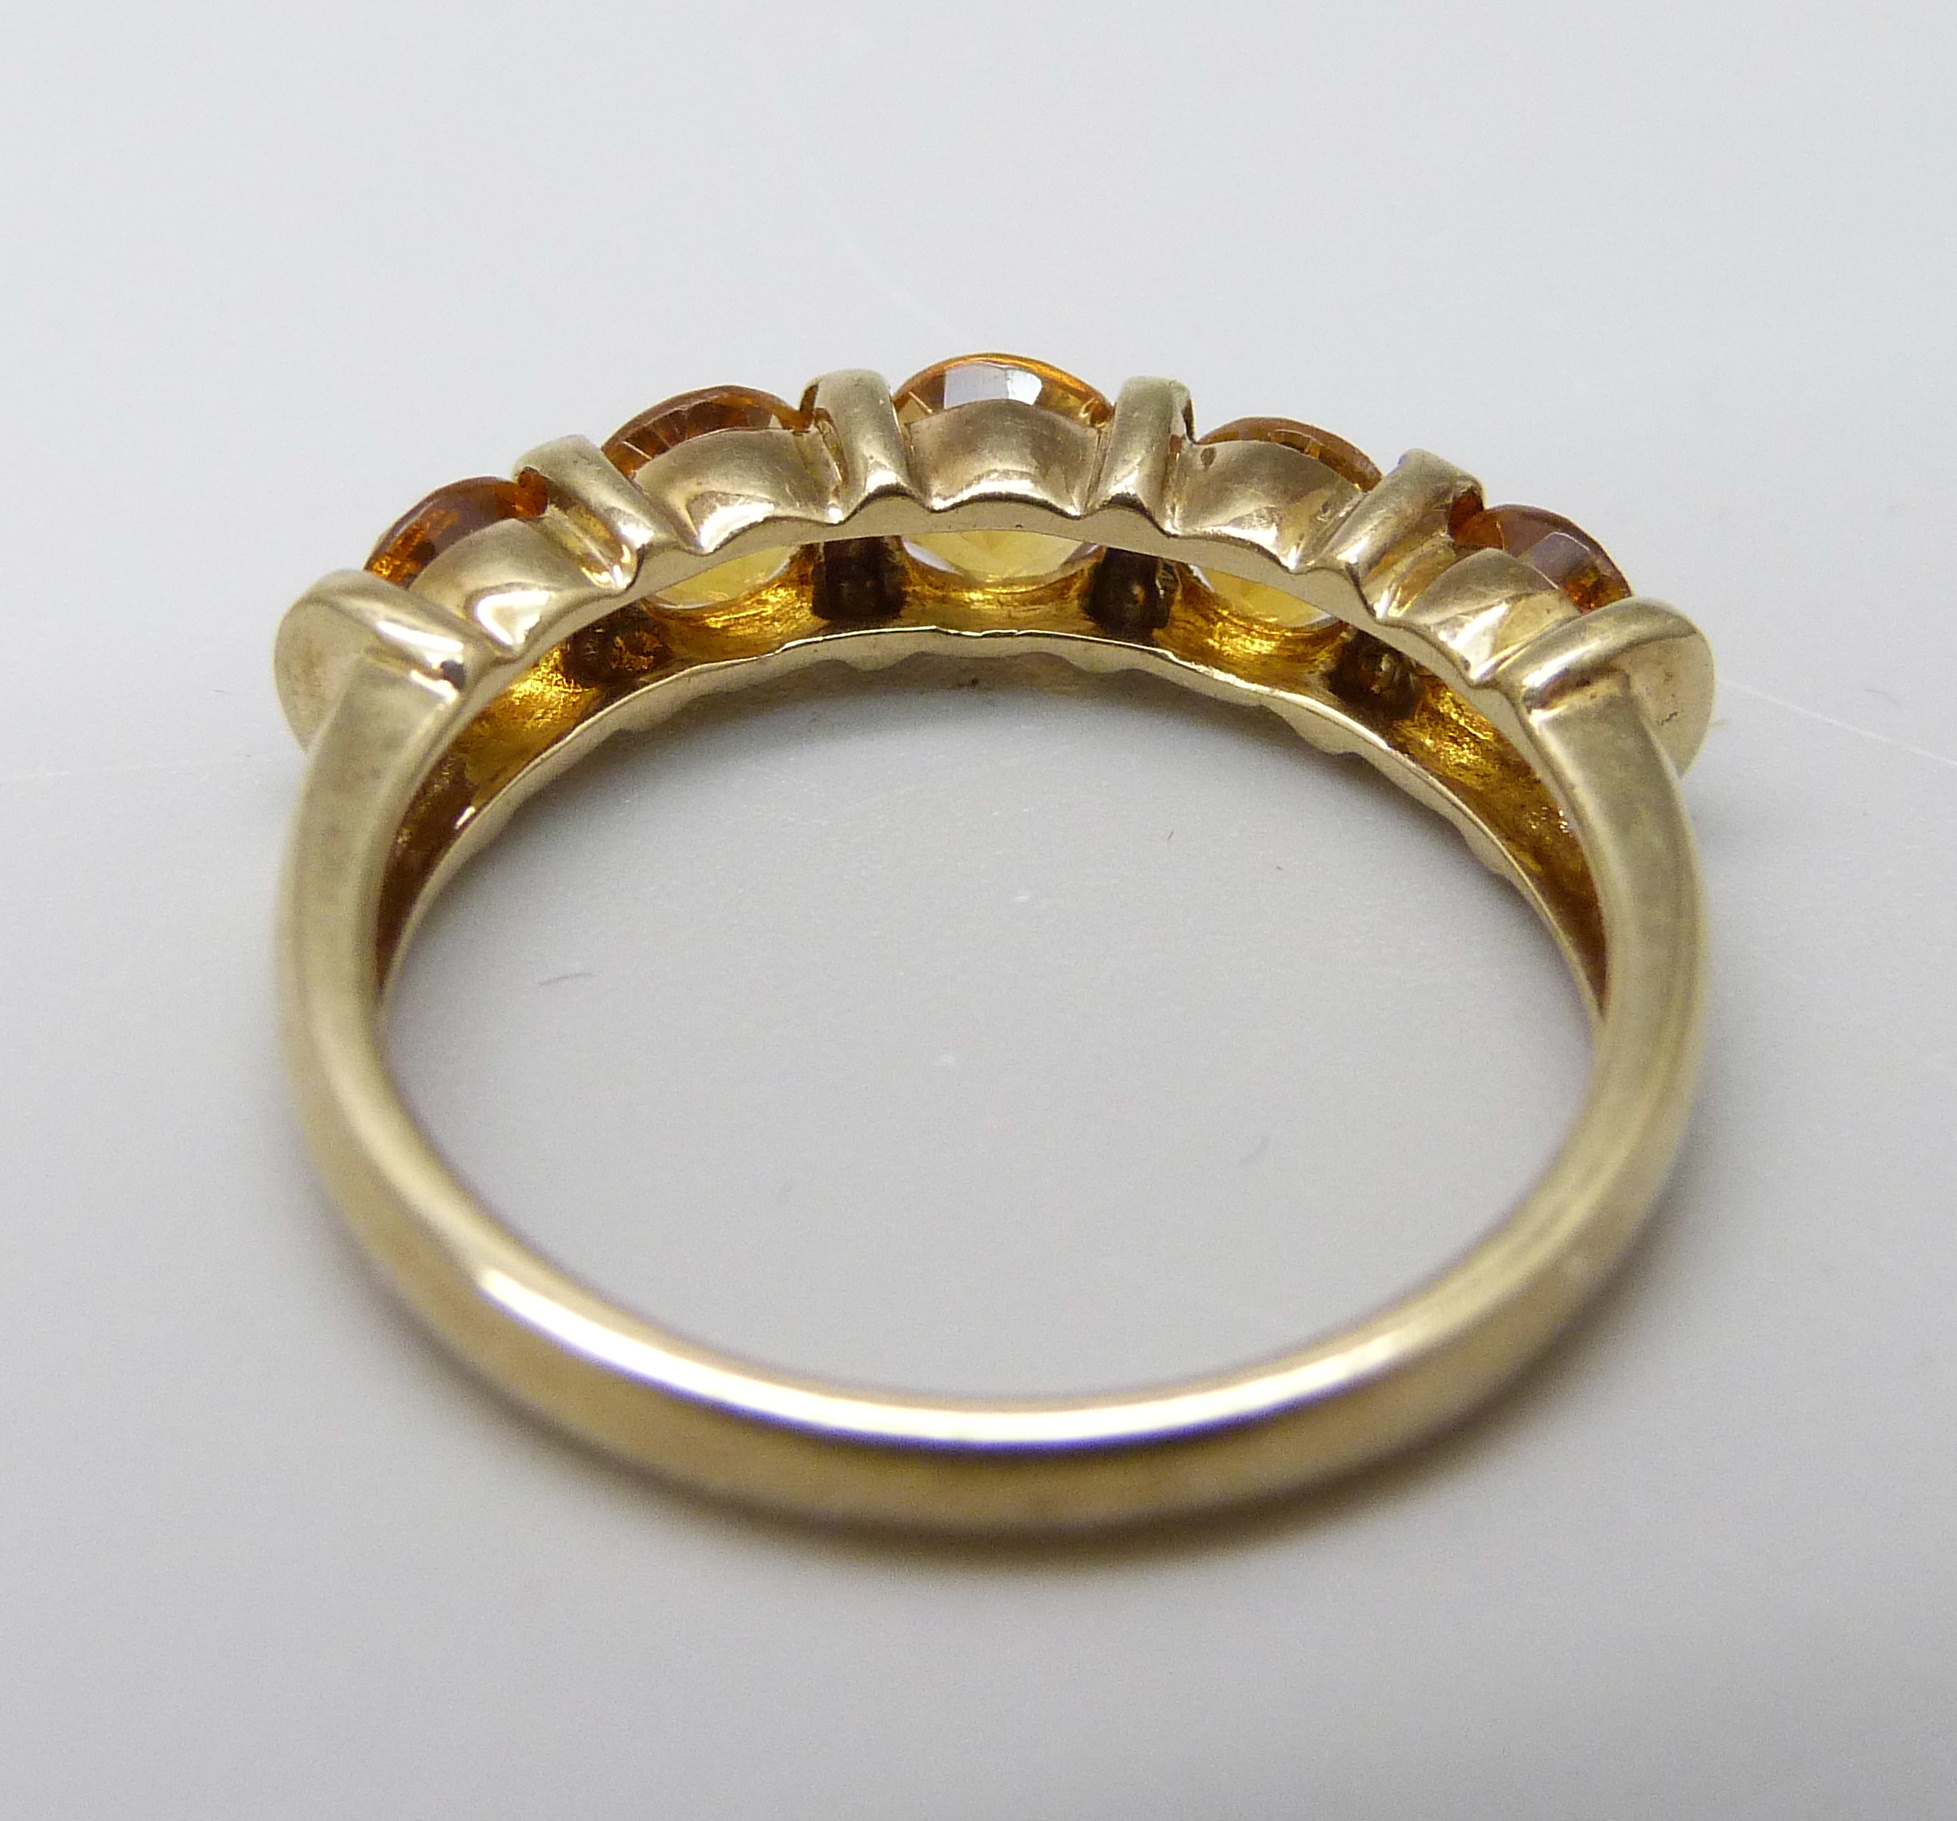 A 9ct gold yellow sapphire ring, 2.1g, M, with certificate - Image 3 of 4